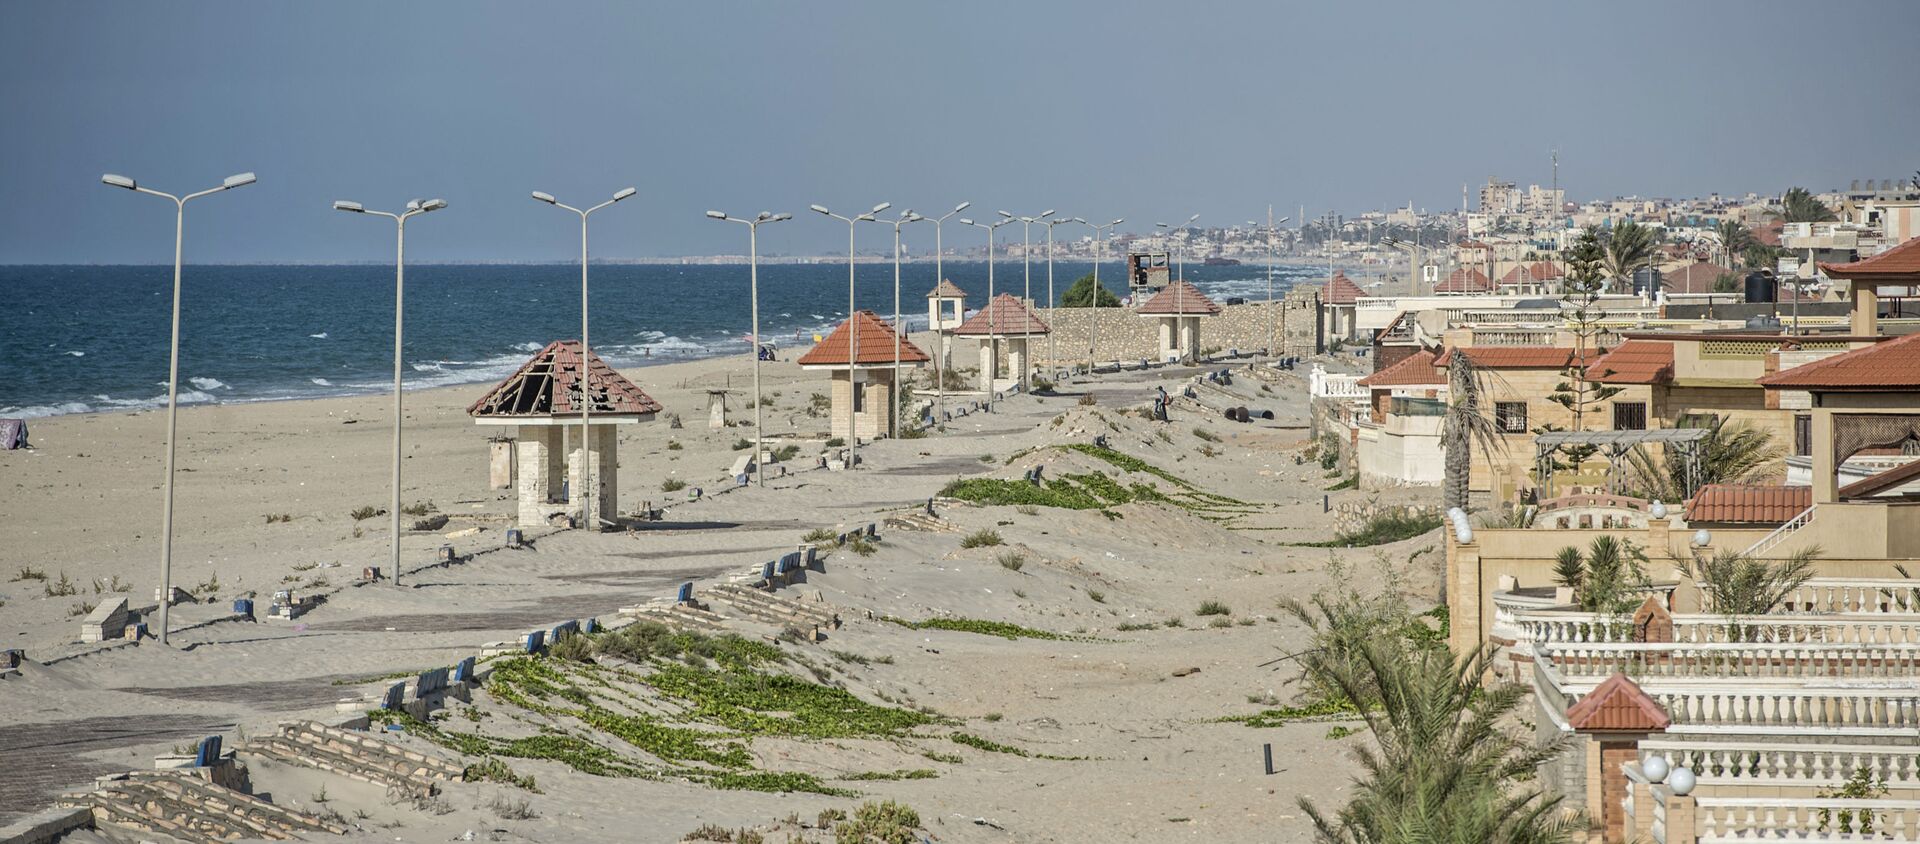 A picture taken on July 26, 2018, during an army-organised tour, shows a general view of the beach of el-Arish city in the northern Sinai Peninsula - Sputnik International, 1920